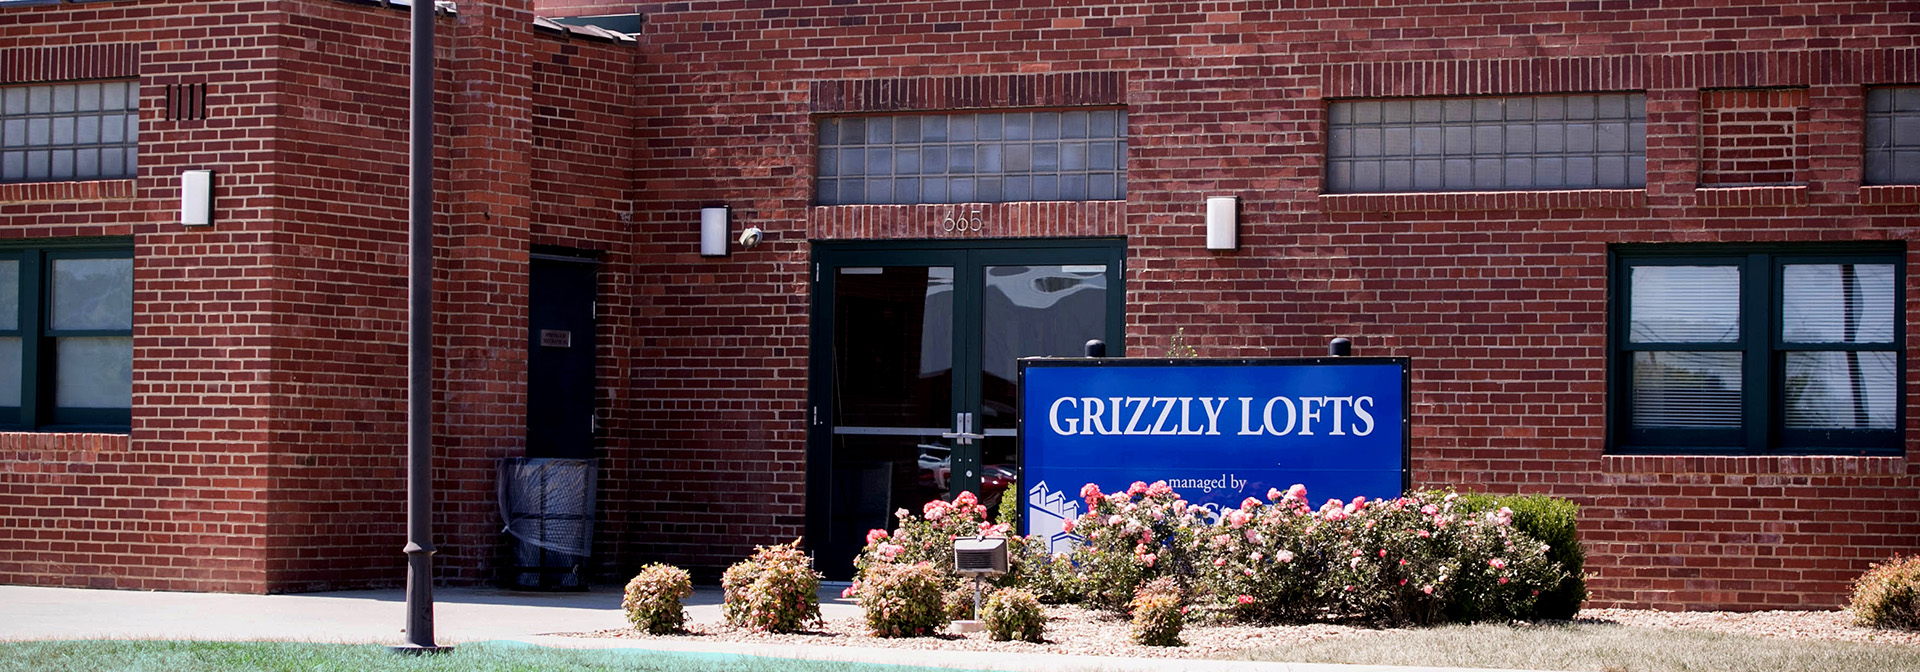 Grizzly Lofts Building